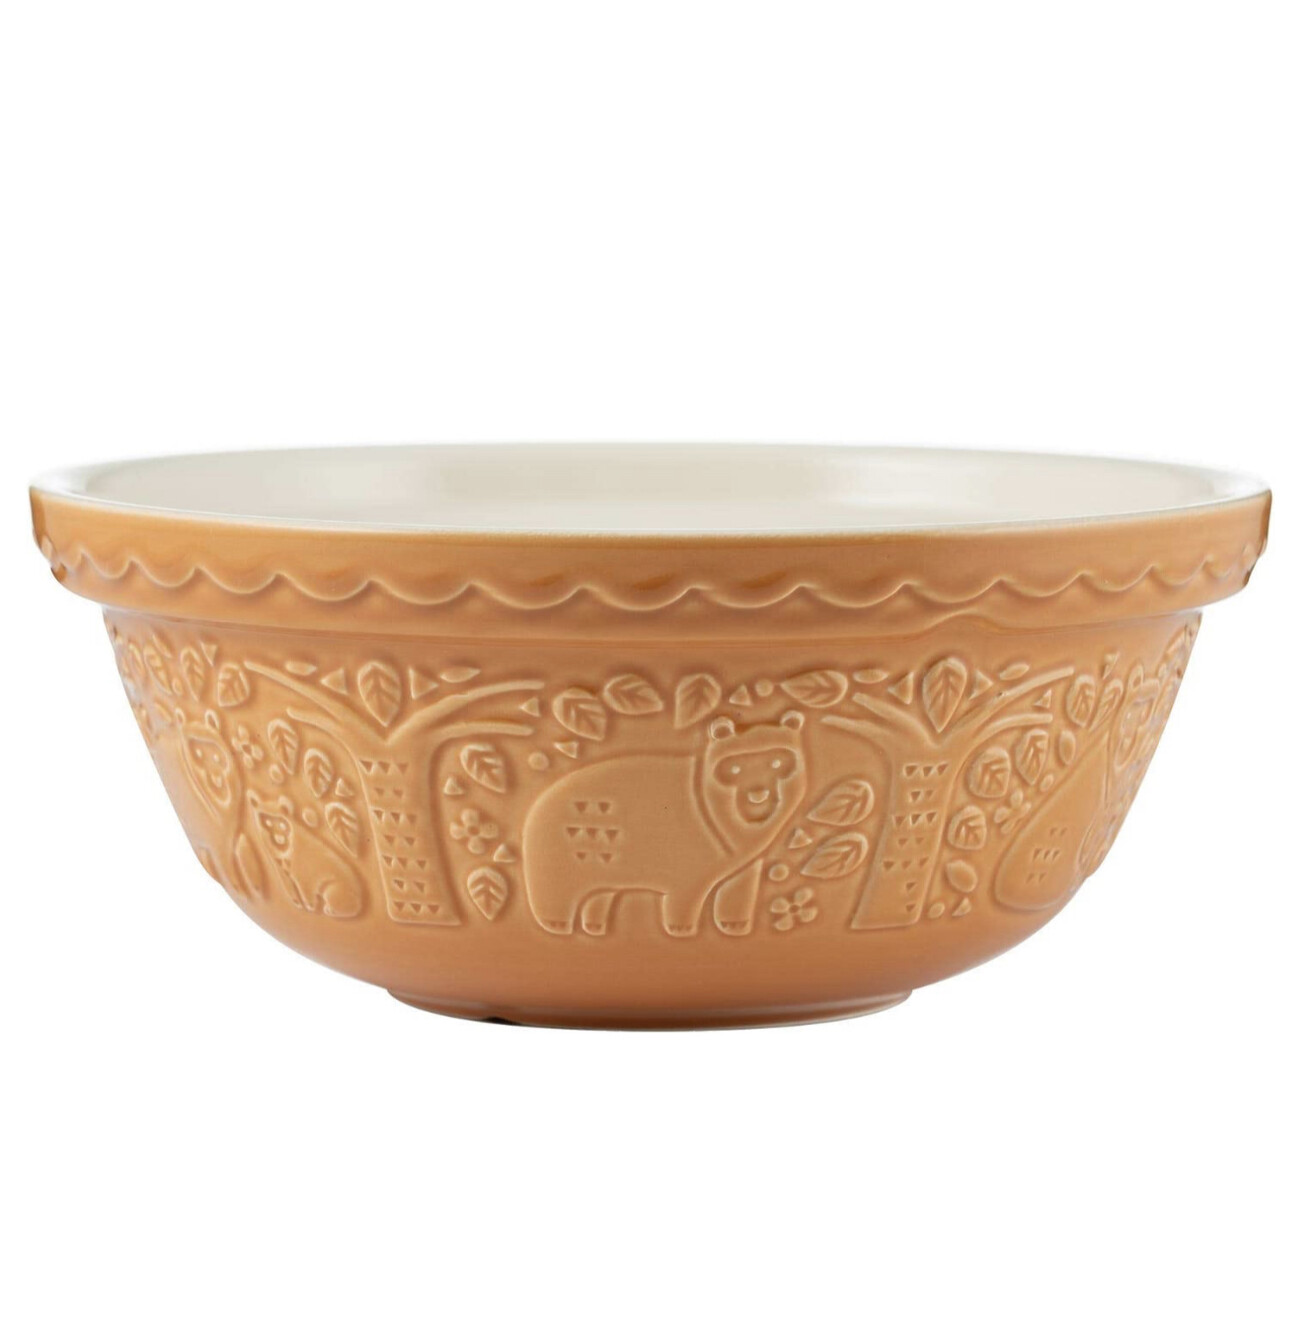 MASON CASH - In the Forest Ochre Mixing Bowl 24cm (Diam)